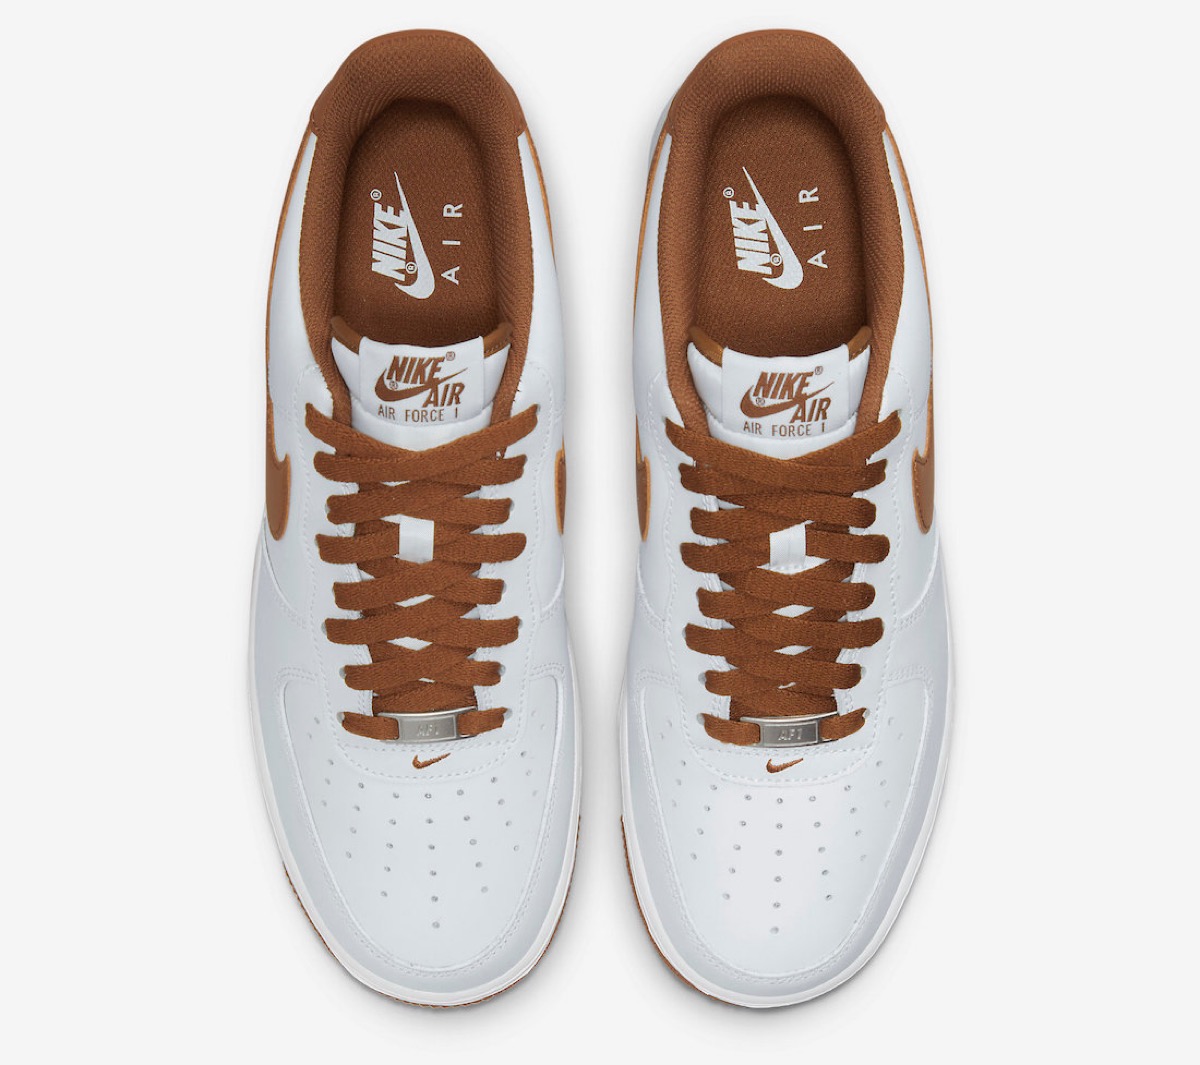 Nike Air Force 1 '07 “White/Pecan”が国内3月12日より発売予定 | UP